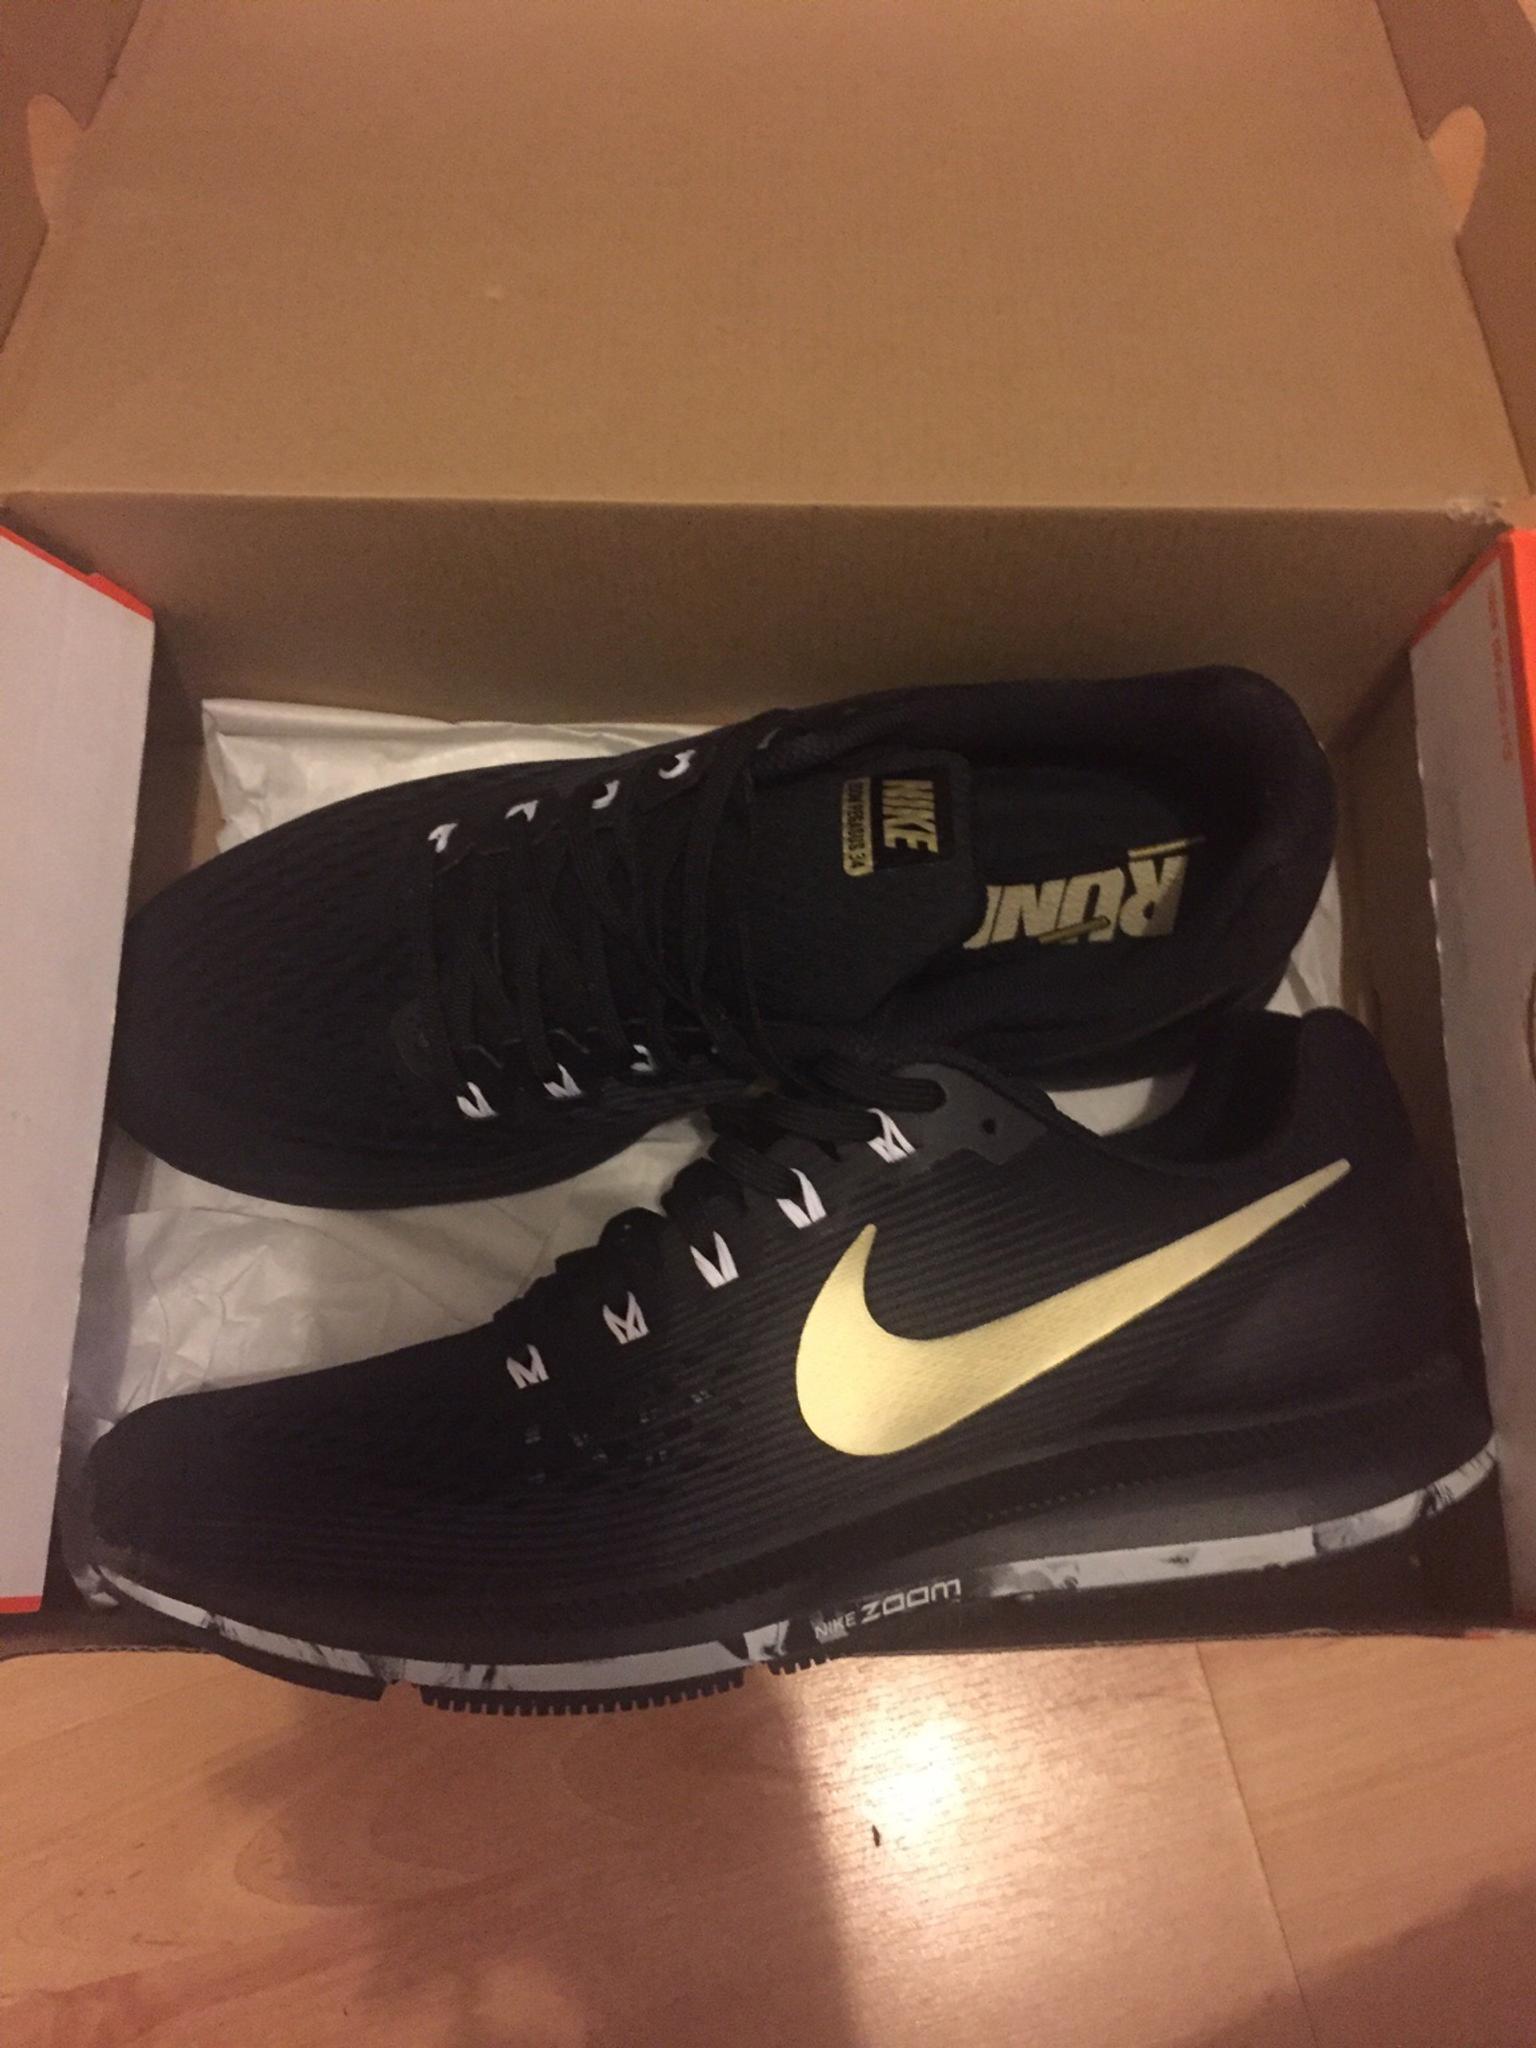 black and gold nike trainers